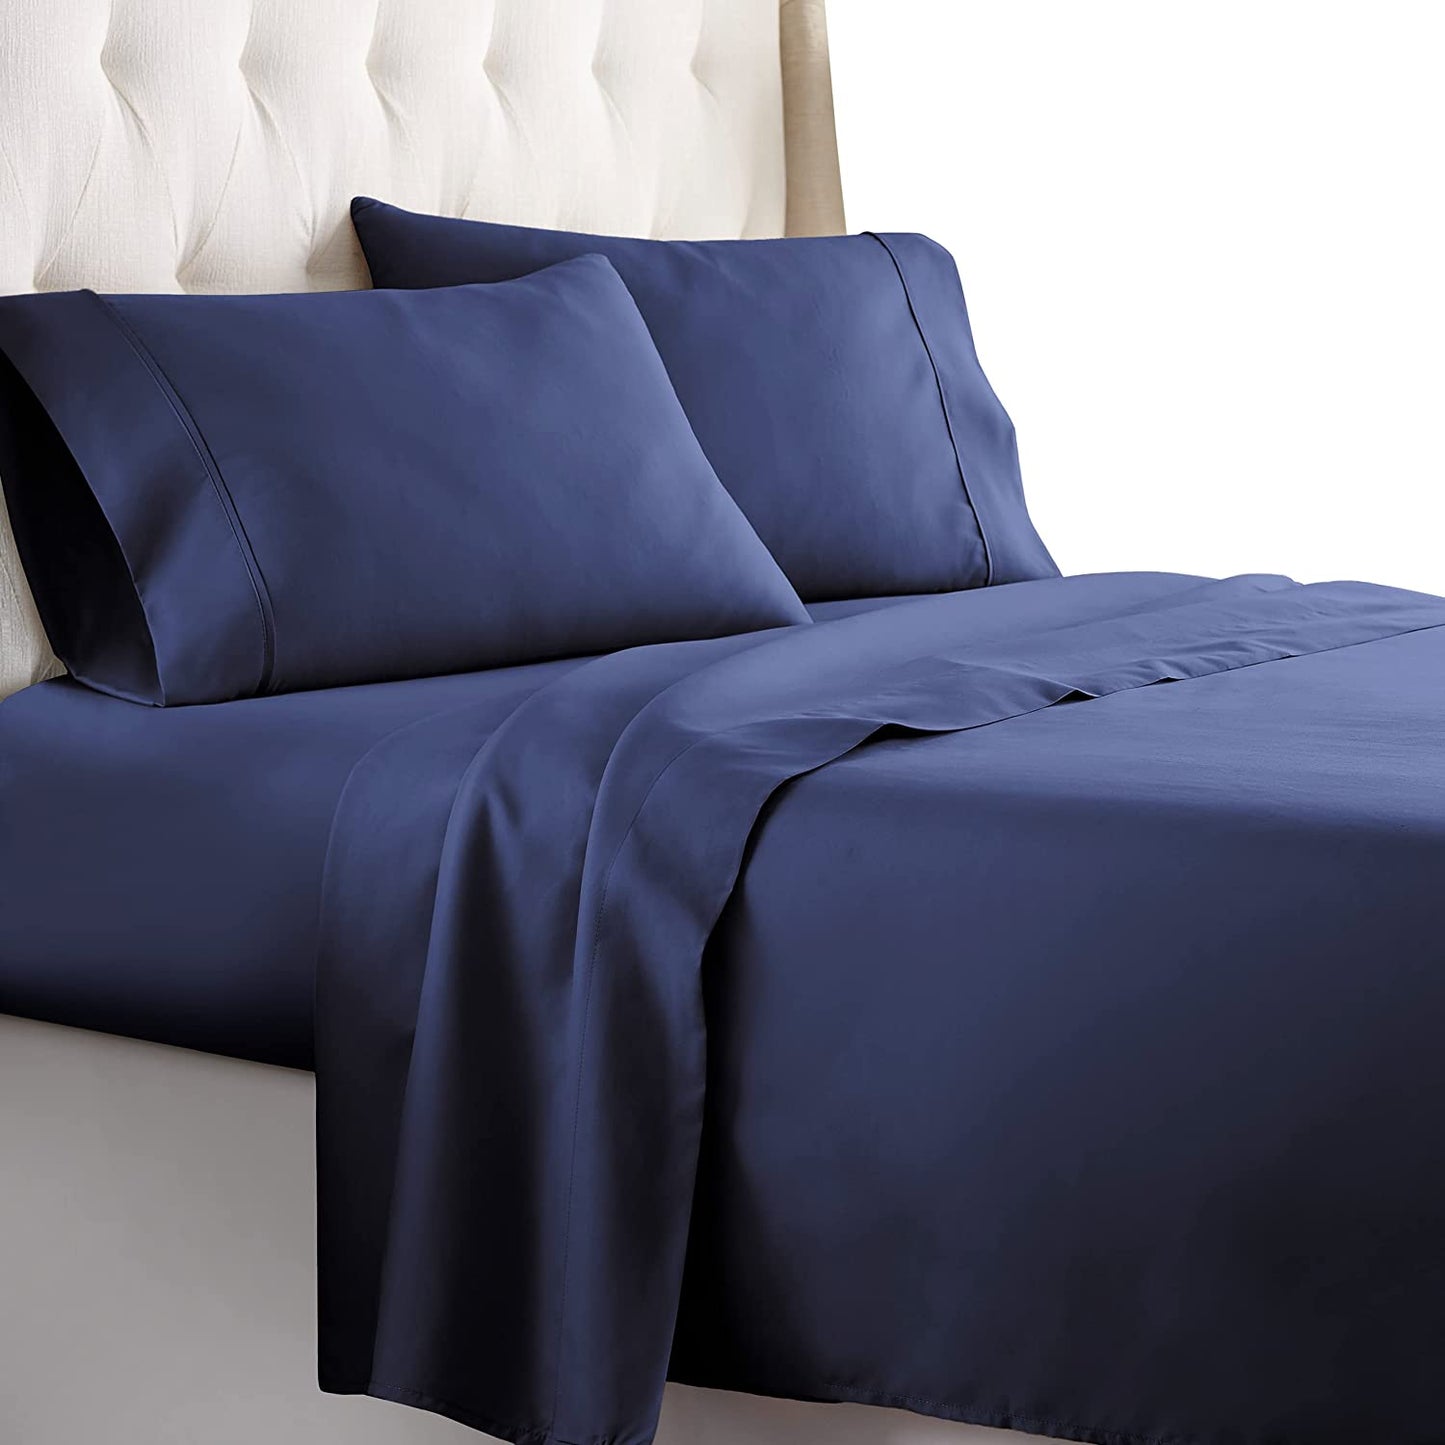 Buy Navy Blue Sheet Bed Sheets Egyptian Cotton at- Egyptianhomelinens.com